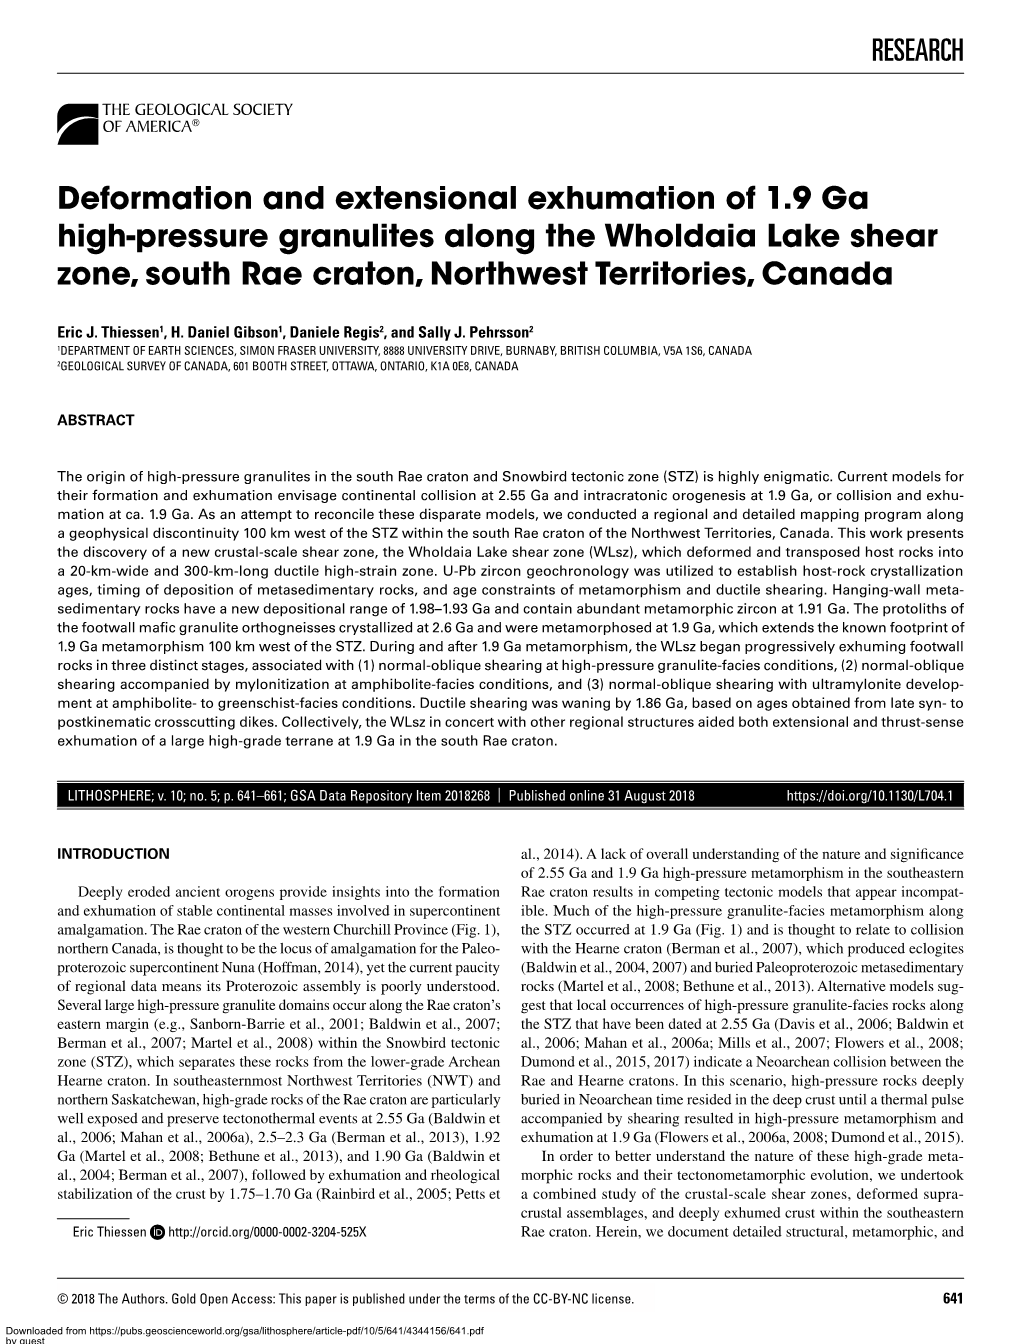 RESEARCH Deformation and Extensional